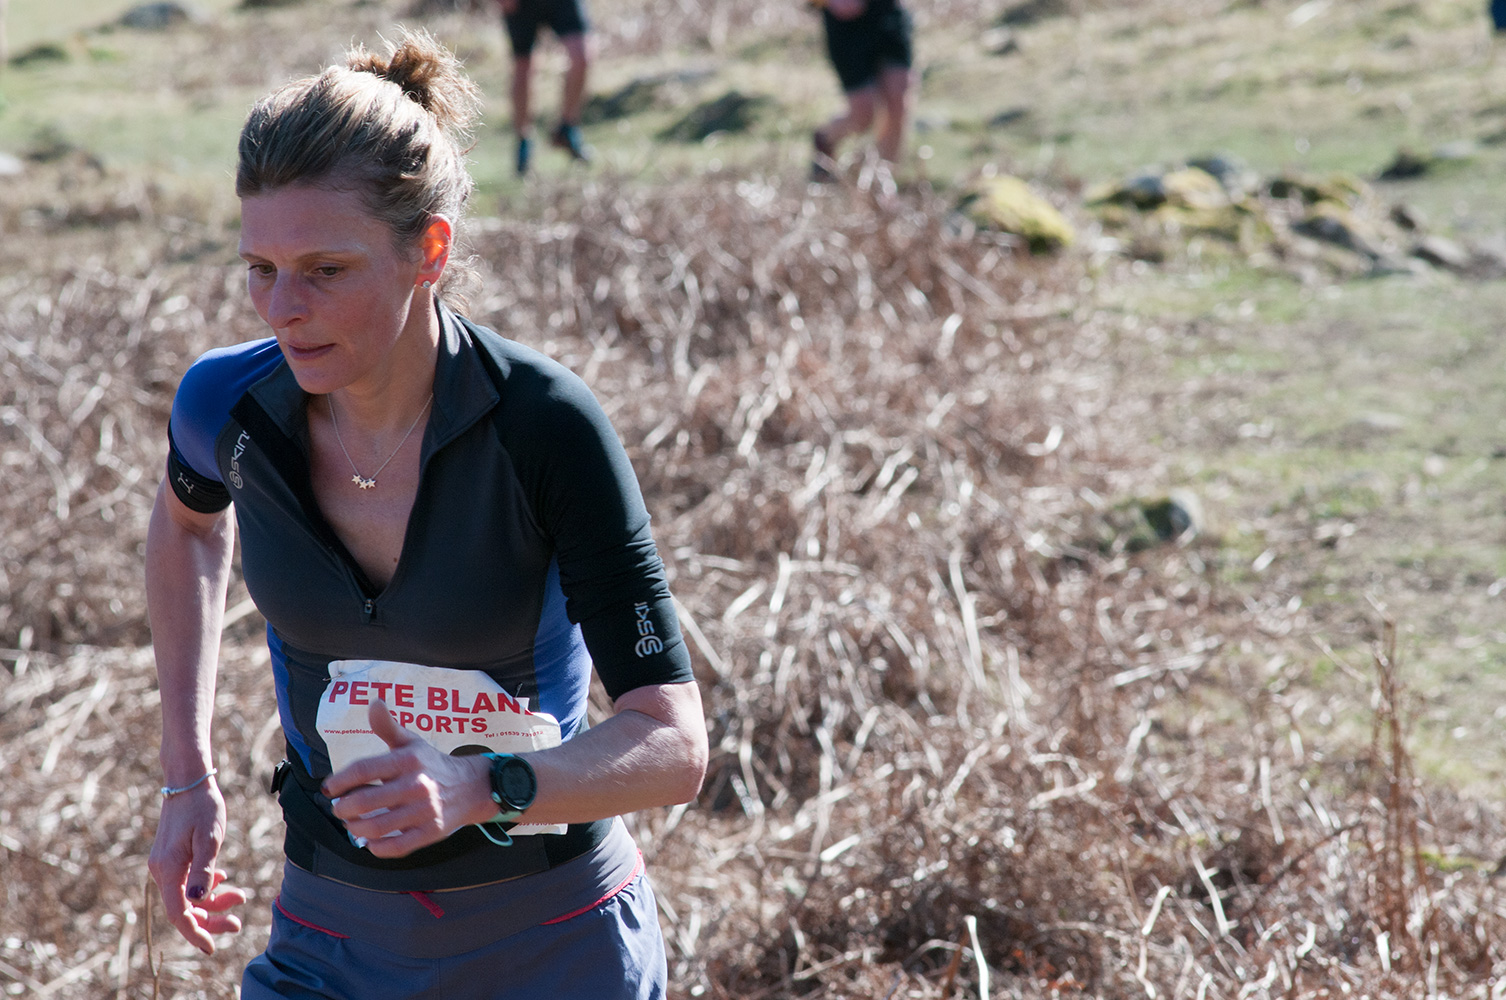 This is a 10.6Km race from the Strands Inn, Nether Wasdale, Cumbria. The 2016 race was held on 19th March.